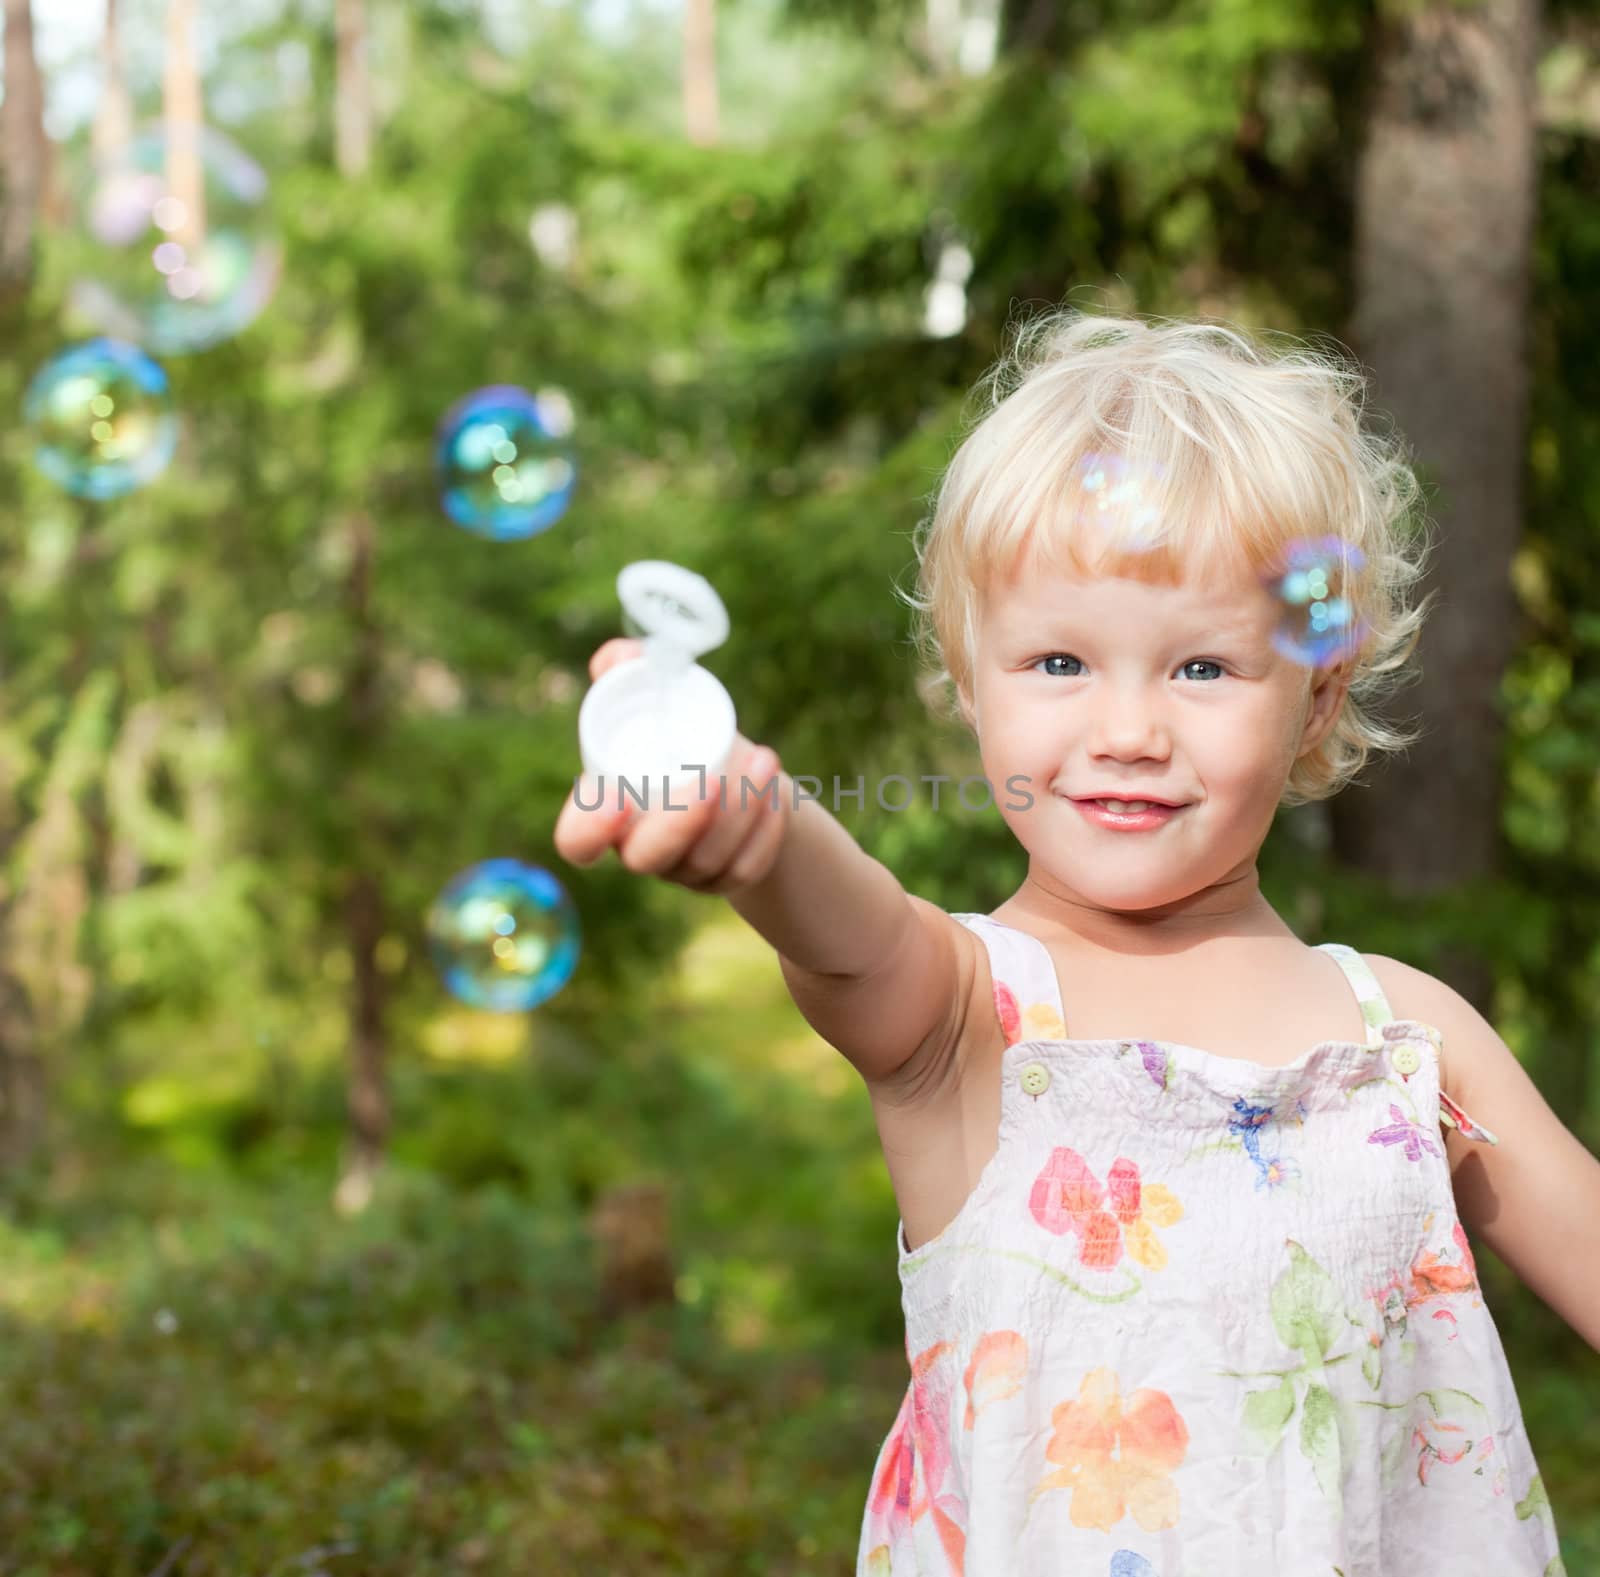 Cute little girl playing with soap bubbles outdoors